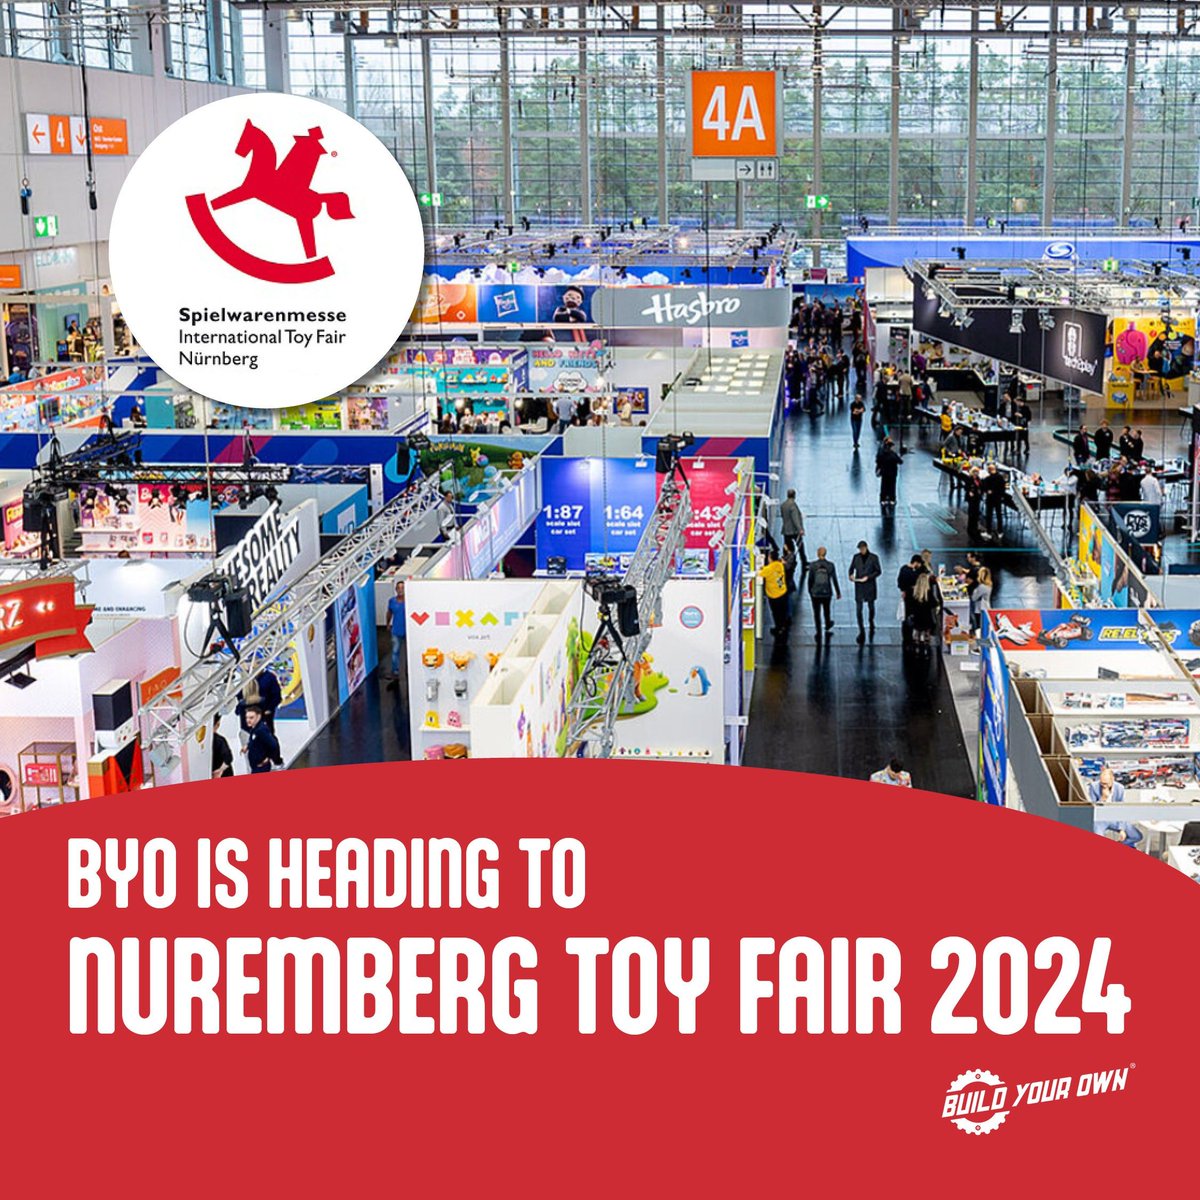 We’re heading to Nuremberg for our next Toy Fair! 🌟 We'll be there 30th Jan - 3rd Feb. You’ll find us in Hall 12 UK Pavilion Stand B-03-5 – come and say hi! We’d love to meet you and to show you our exciting NEW kits for 2024! 😀 #byokits #nurembergtoyfair #spielwarenmesse